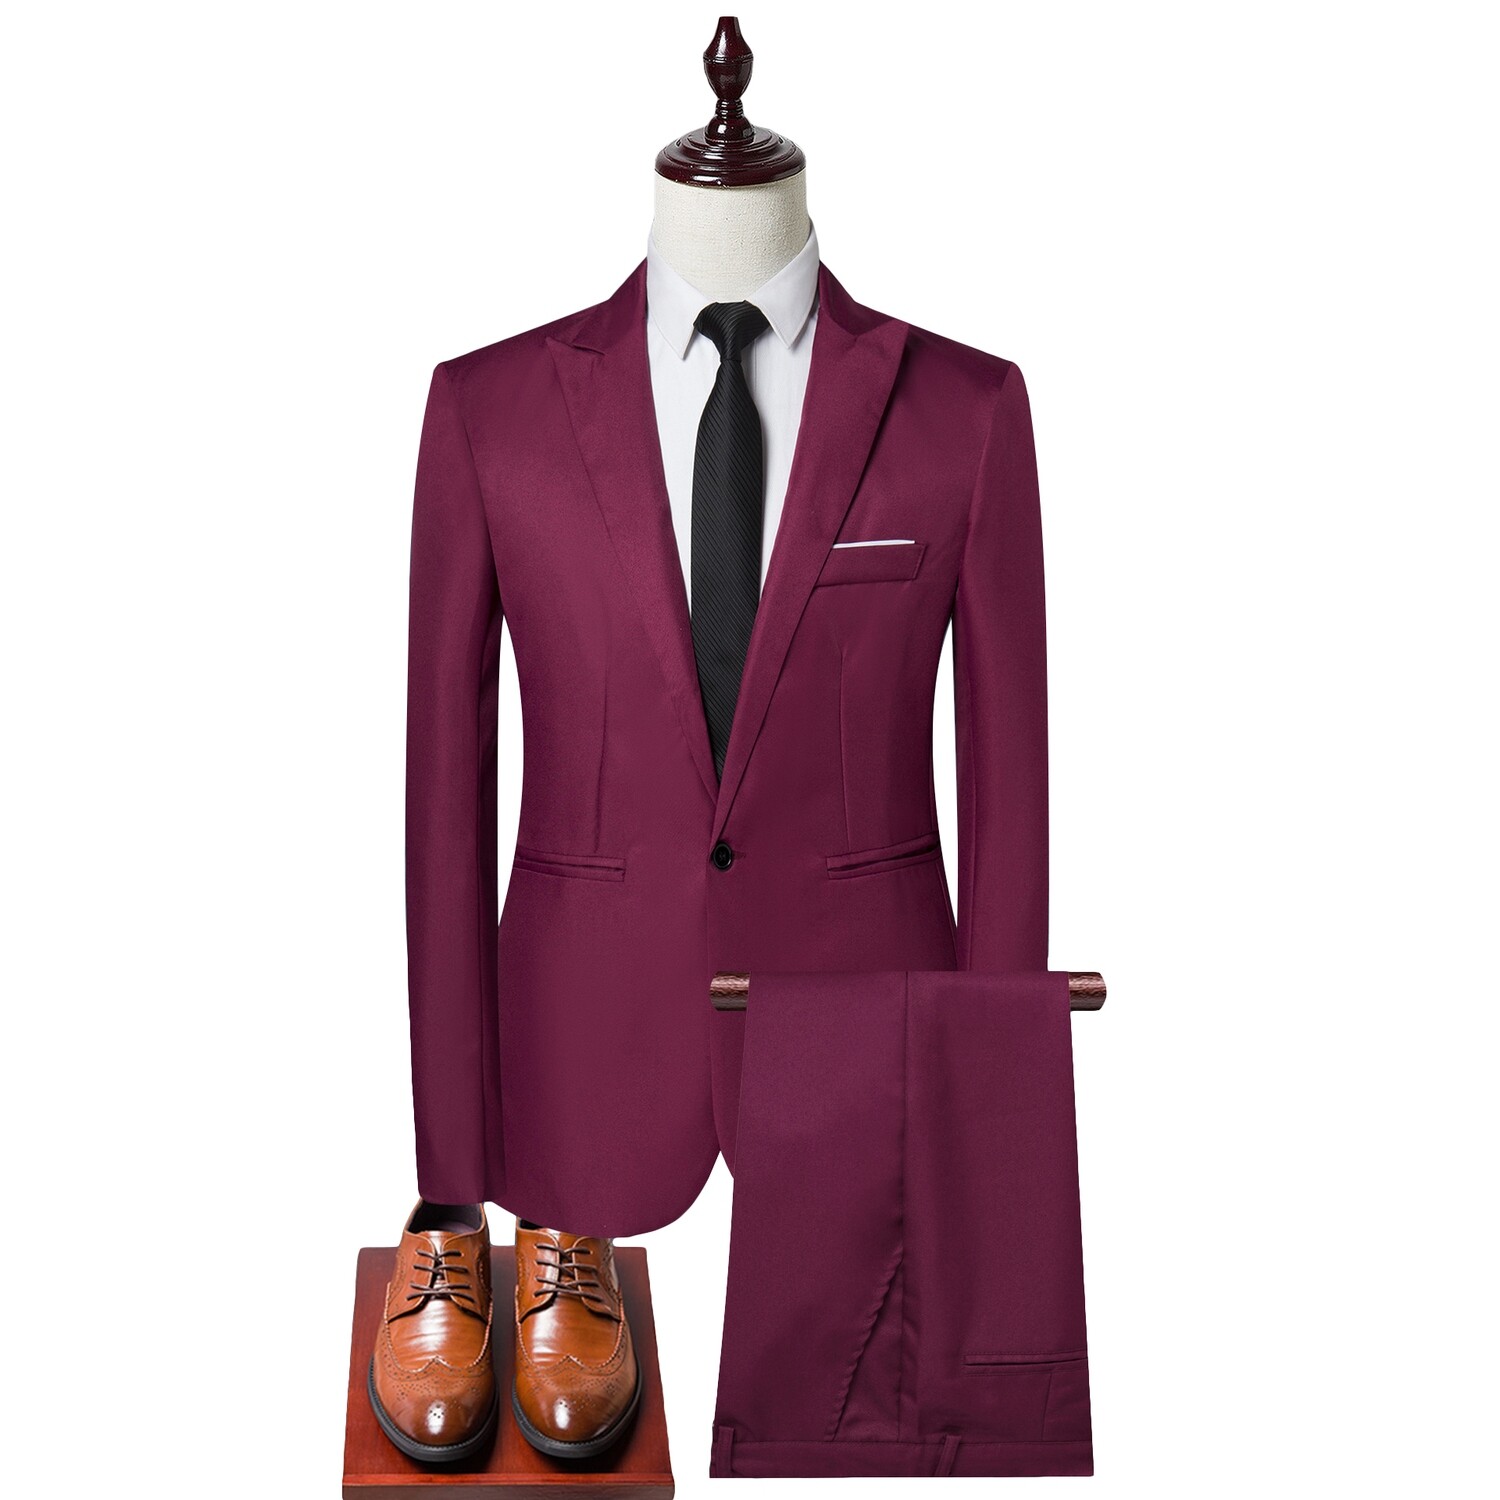 Italian Suit For Men With Peaked Lapel